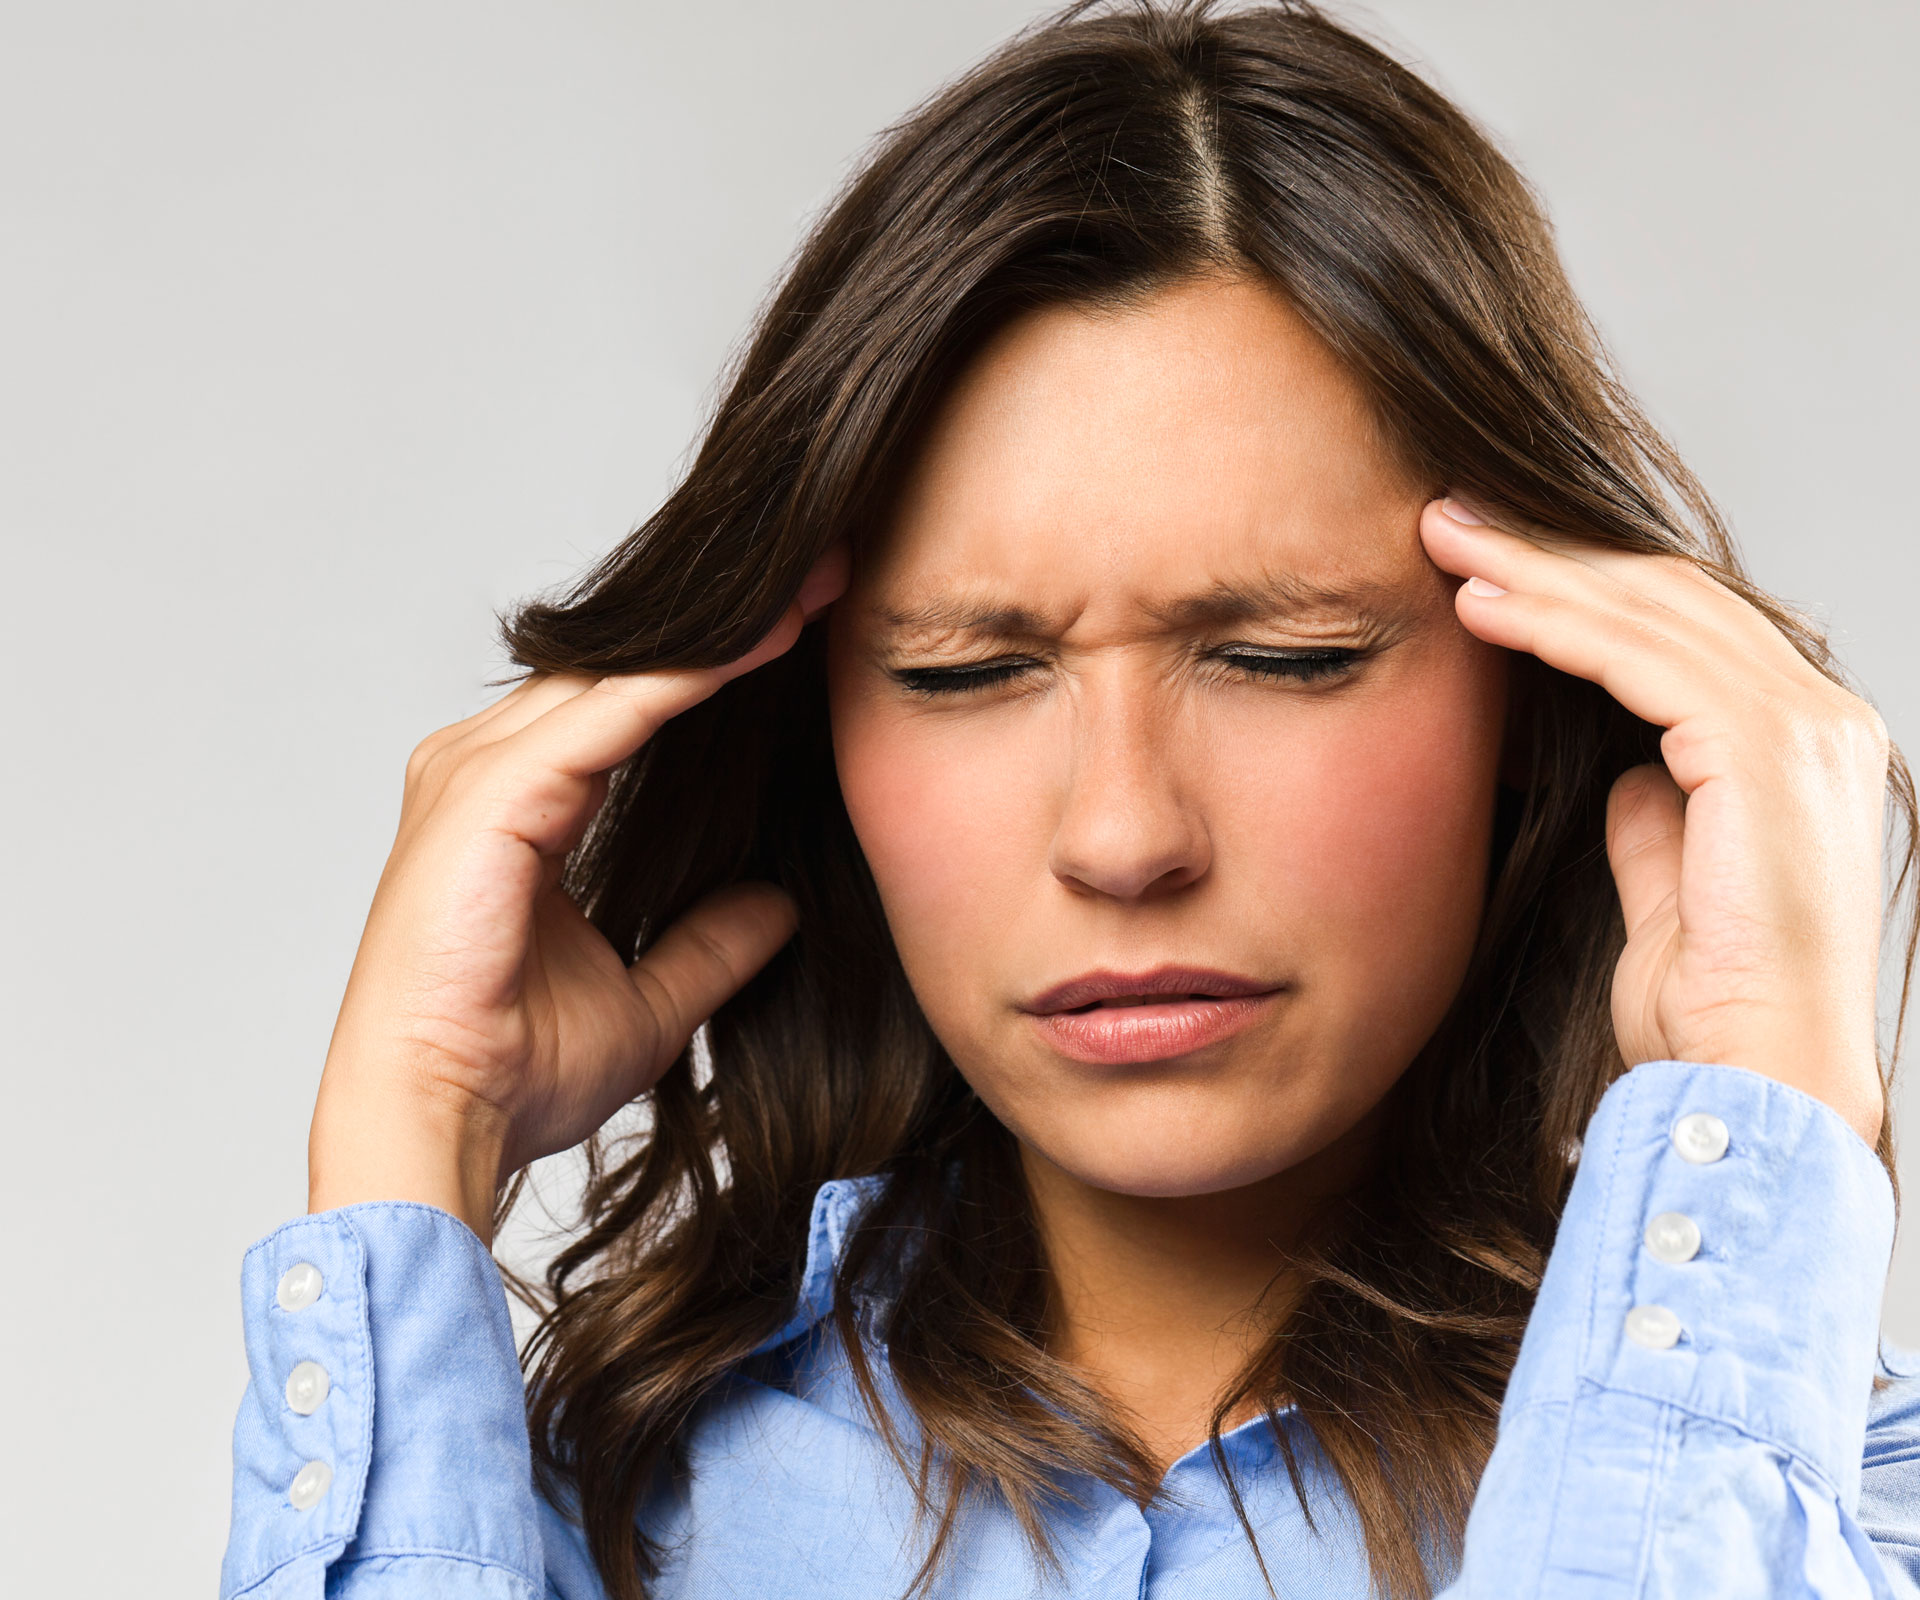 Migraine sufferers:You may need to ditch bacon (and other stuff)